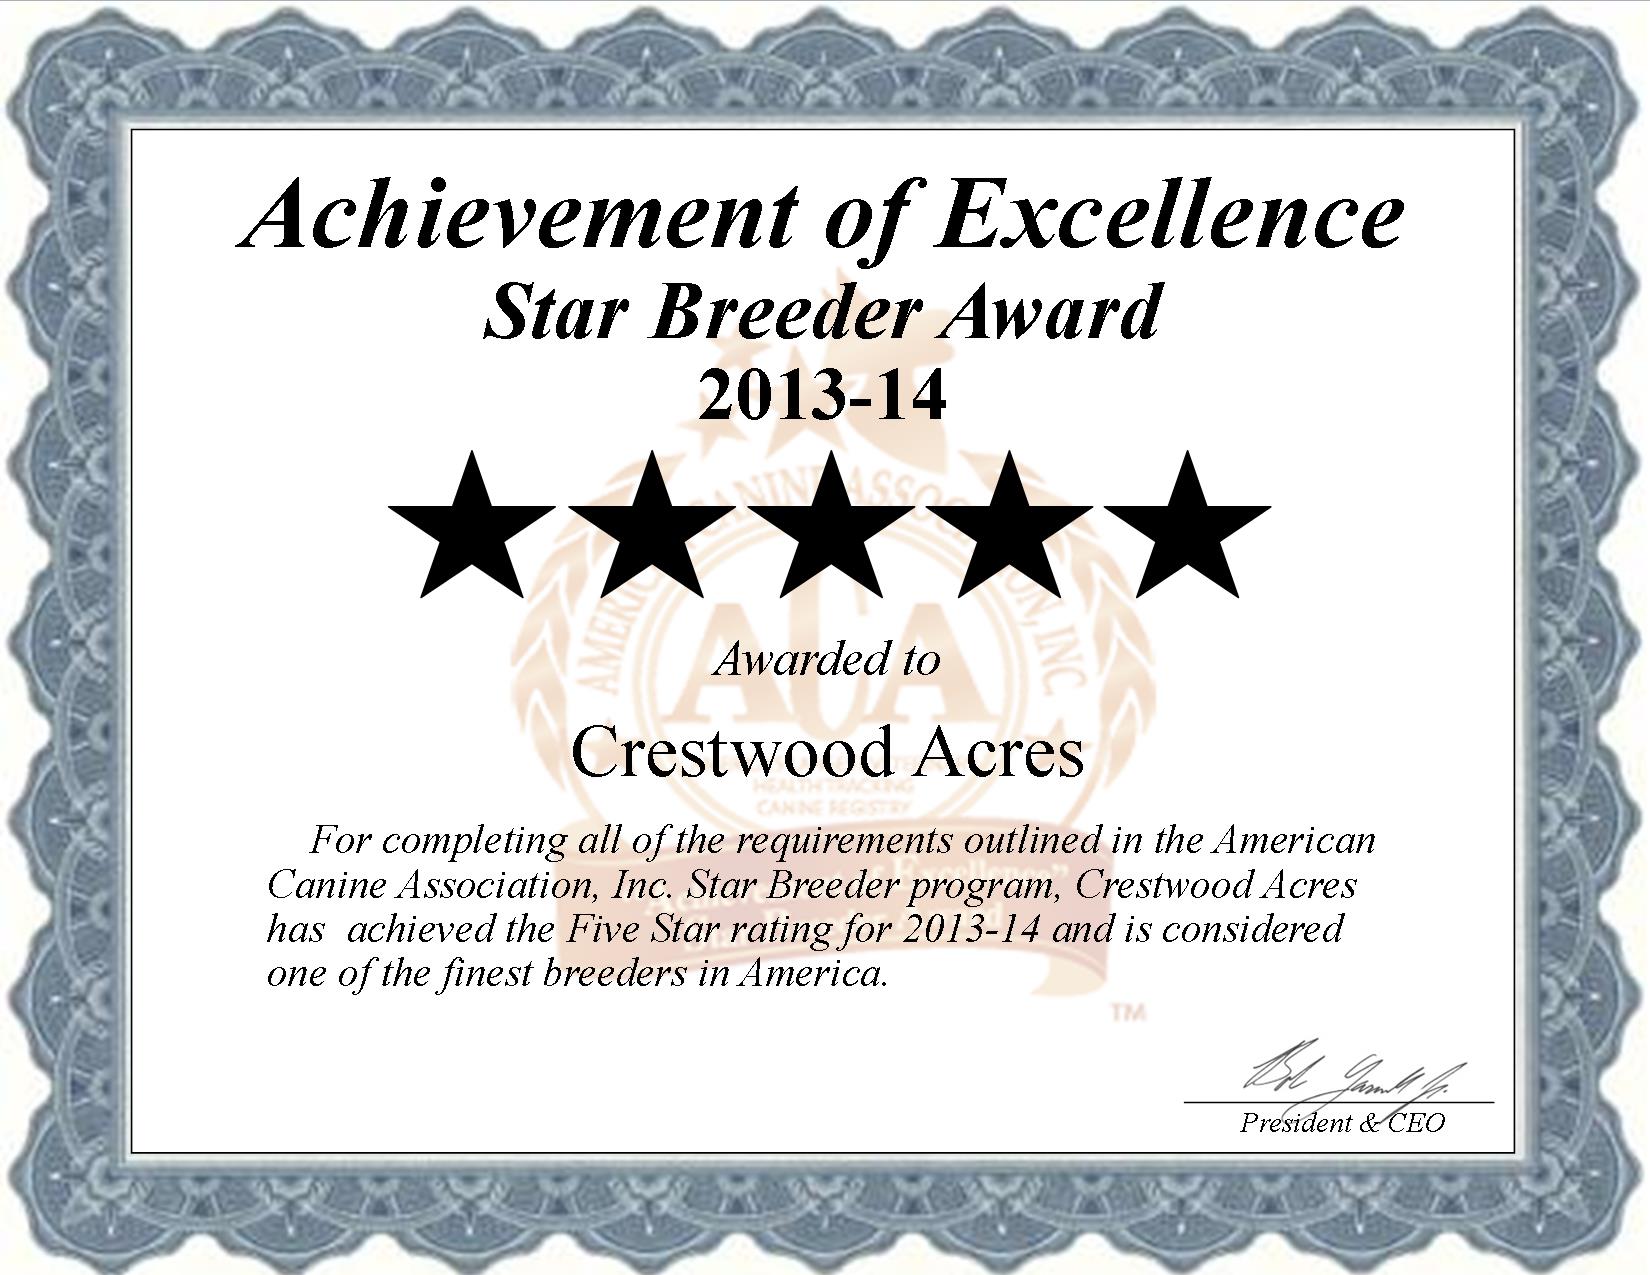 Crestwood, Acres, dog, breeder, star, certificate, Crestwood-Acres, Lyons, NY, New York, puppy, dog, kennels, mill, puppymill, usda, 5-star, aca, ica, registered, Yorkshire Terrier, None